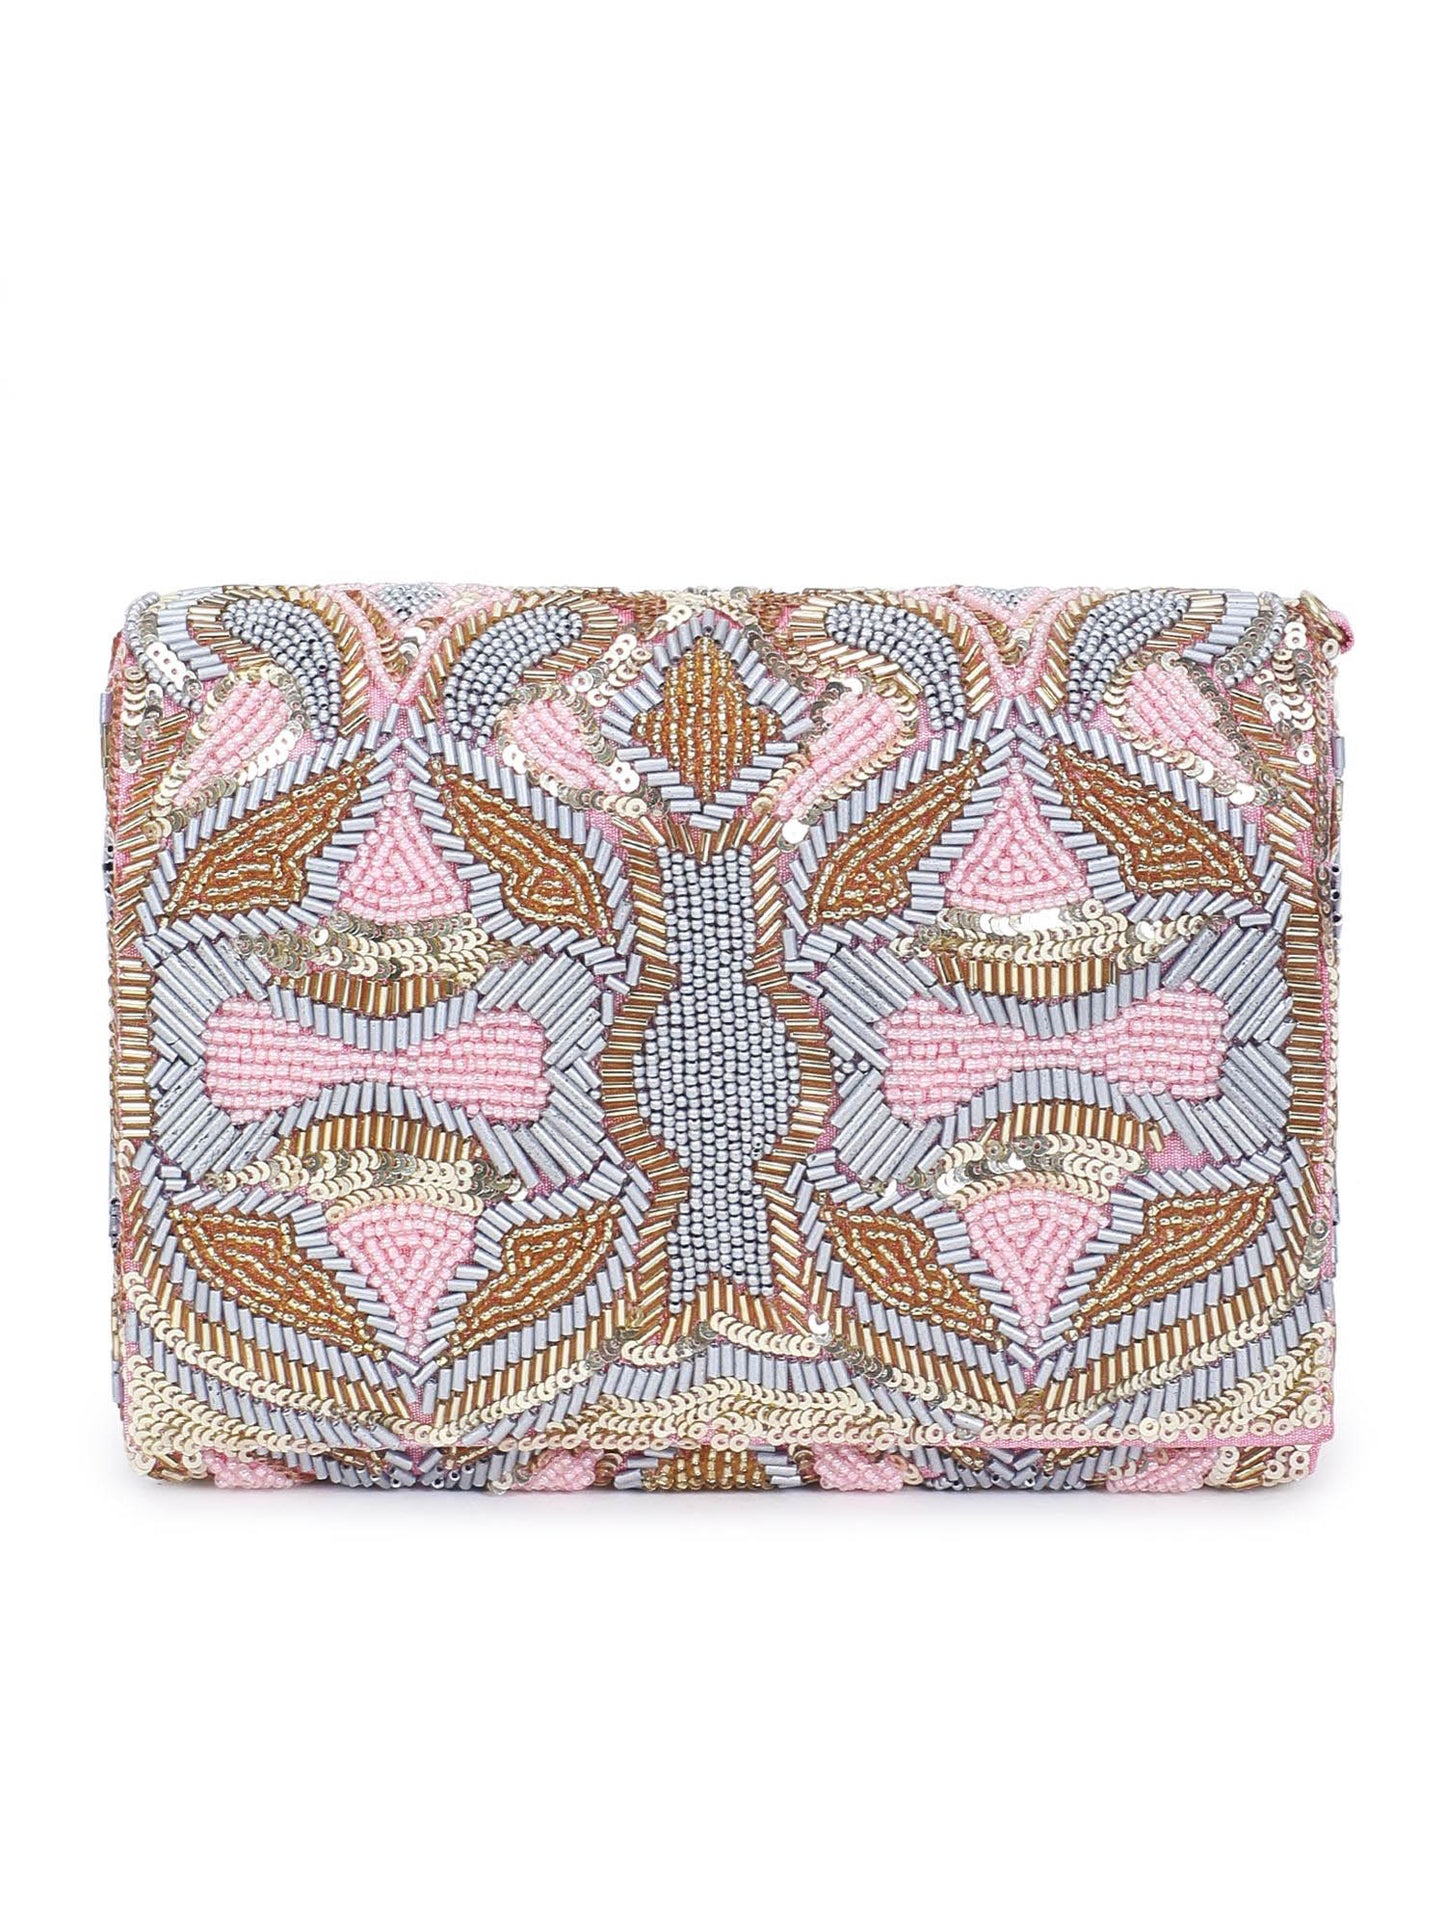 Perfectly pink clutch